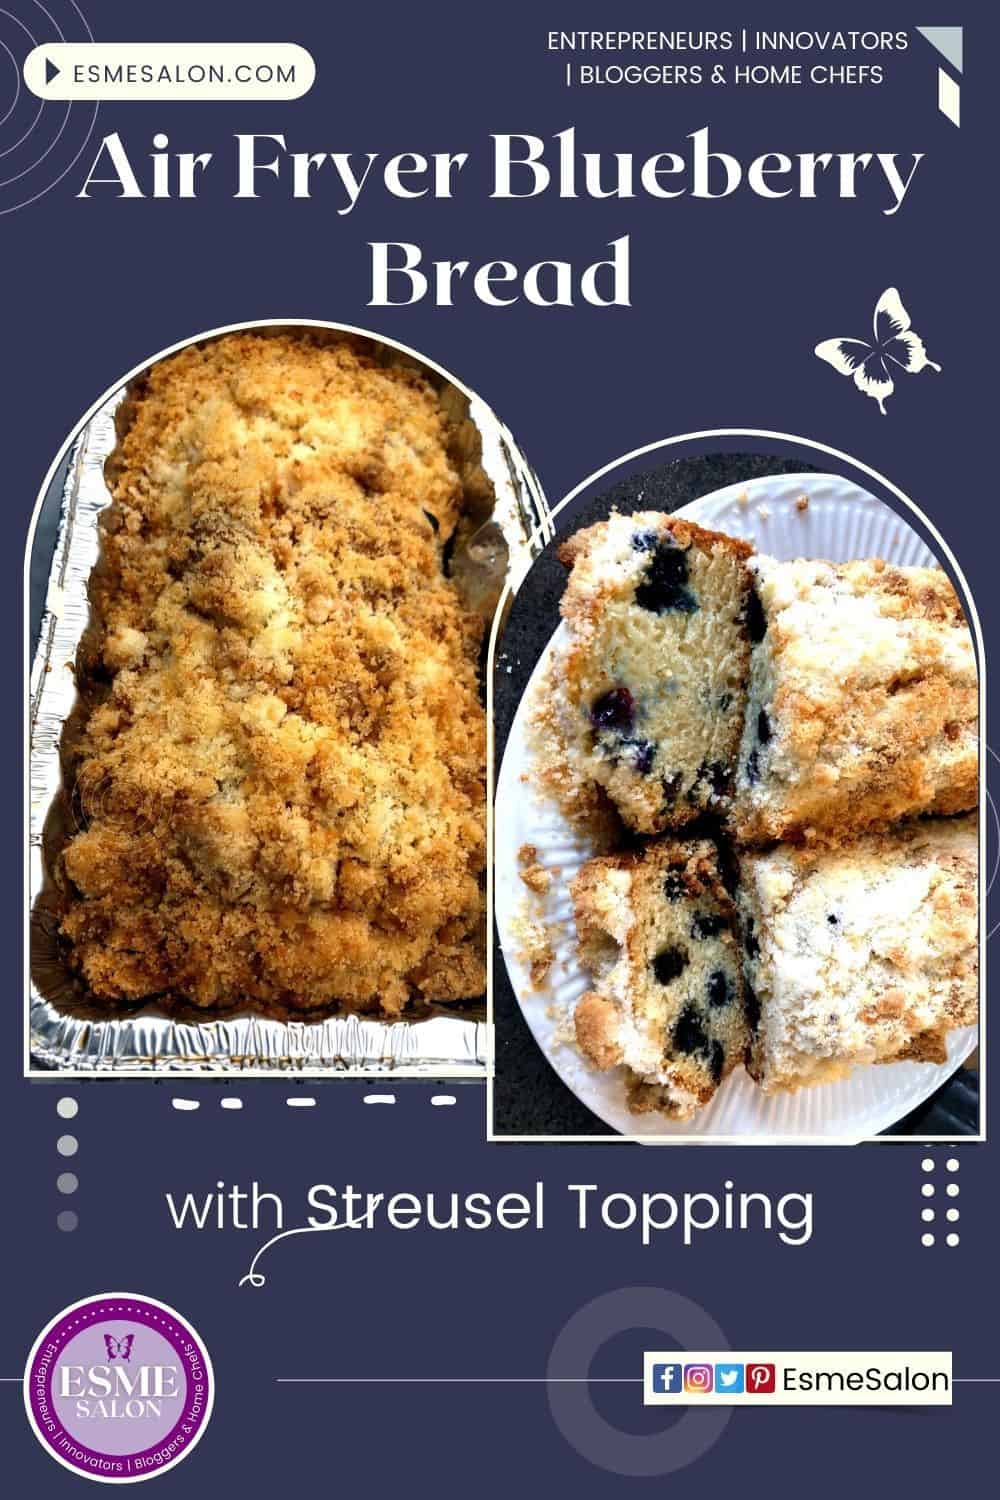 Two Streusel Topped Blueberry Bread made in the Air Fryer